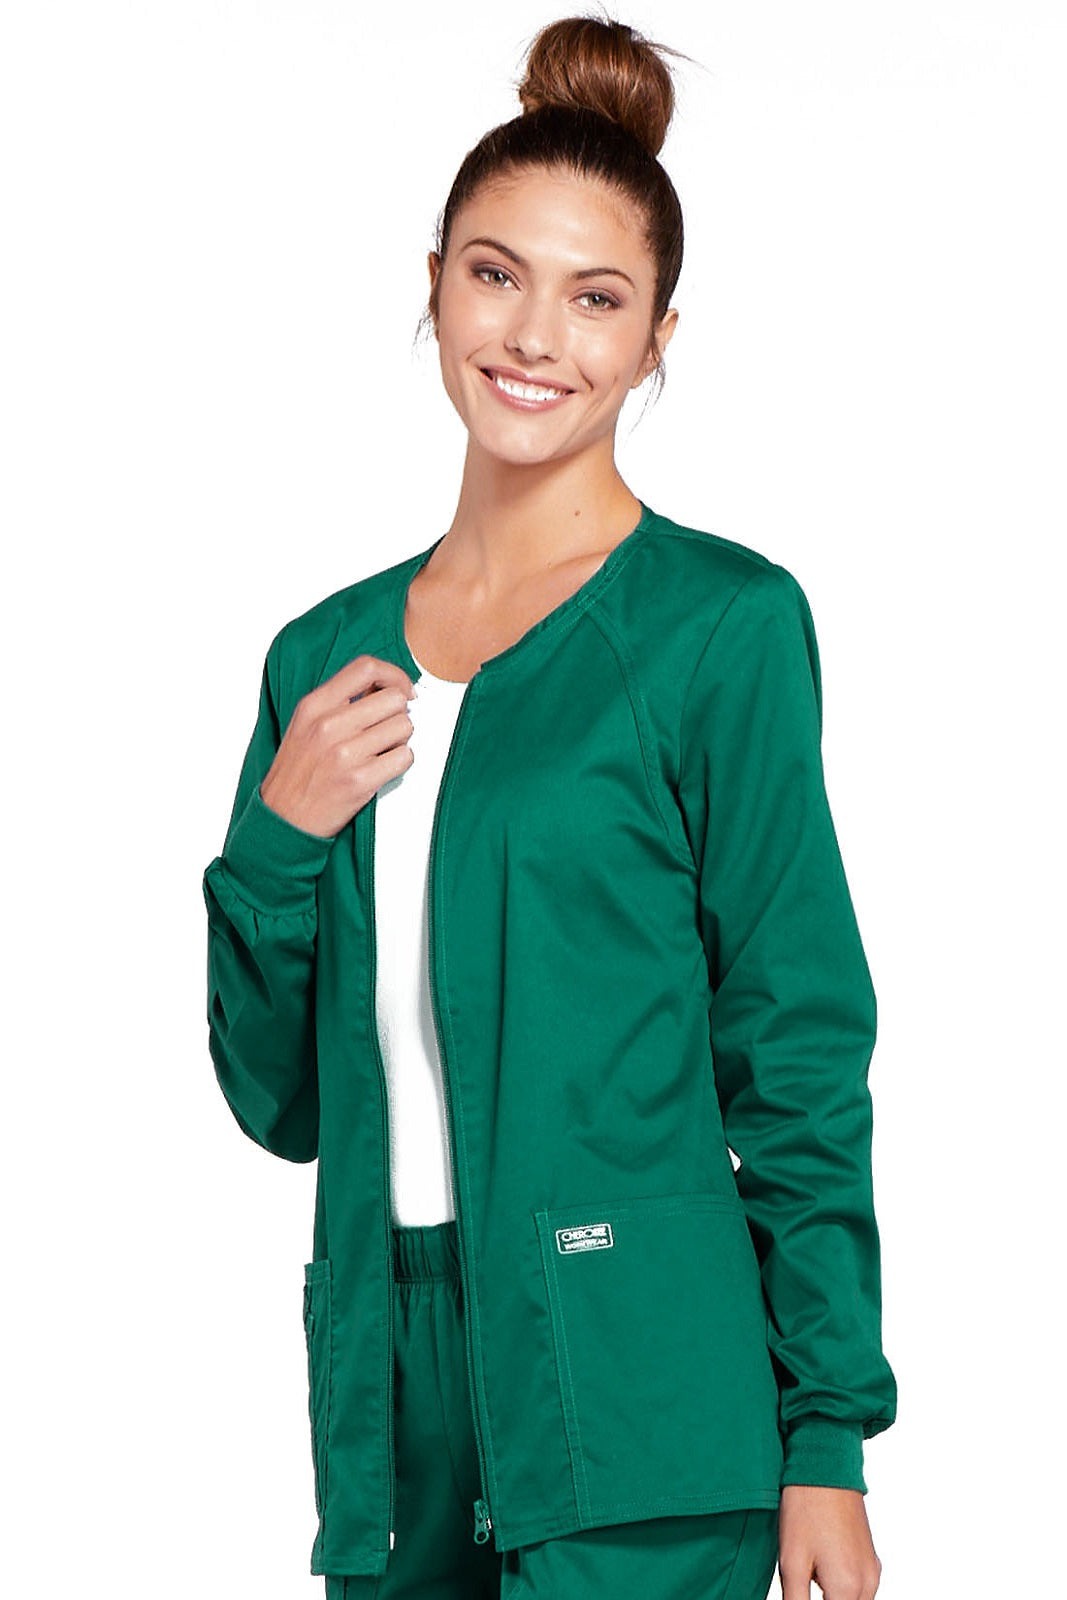 Cherokee Core Stretch Scrub Jacket Zip Front 4315 in Hunter at Parker's Clothing and Shoes.